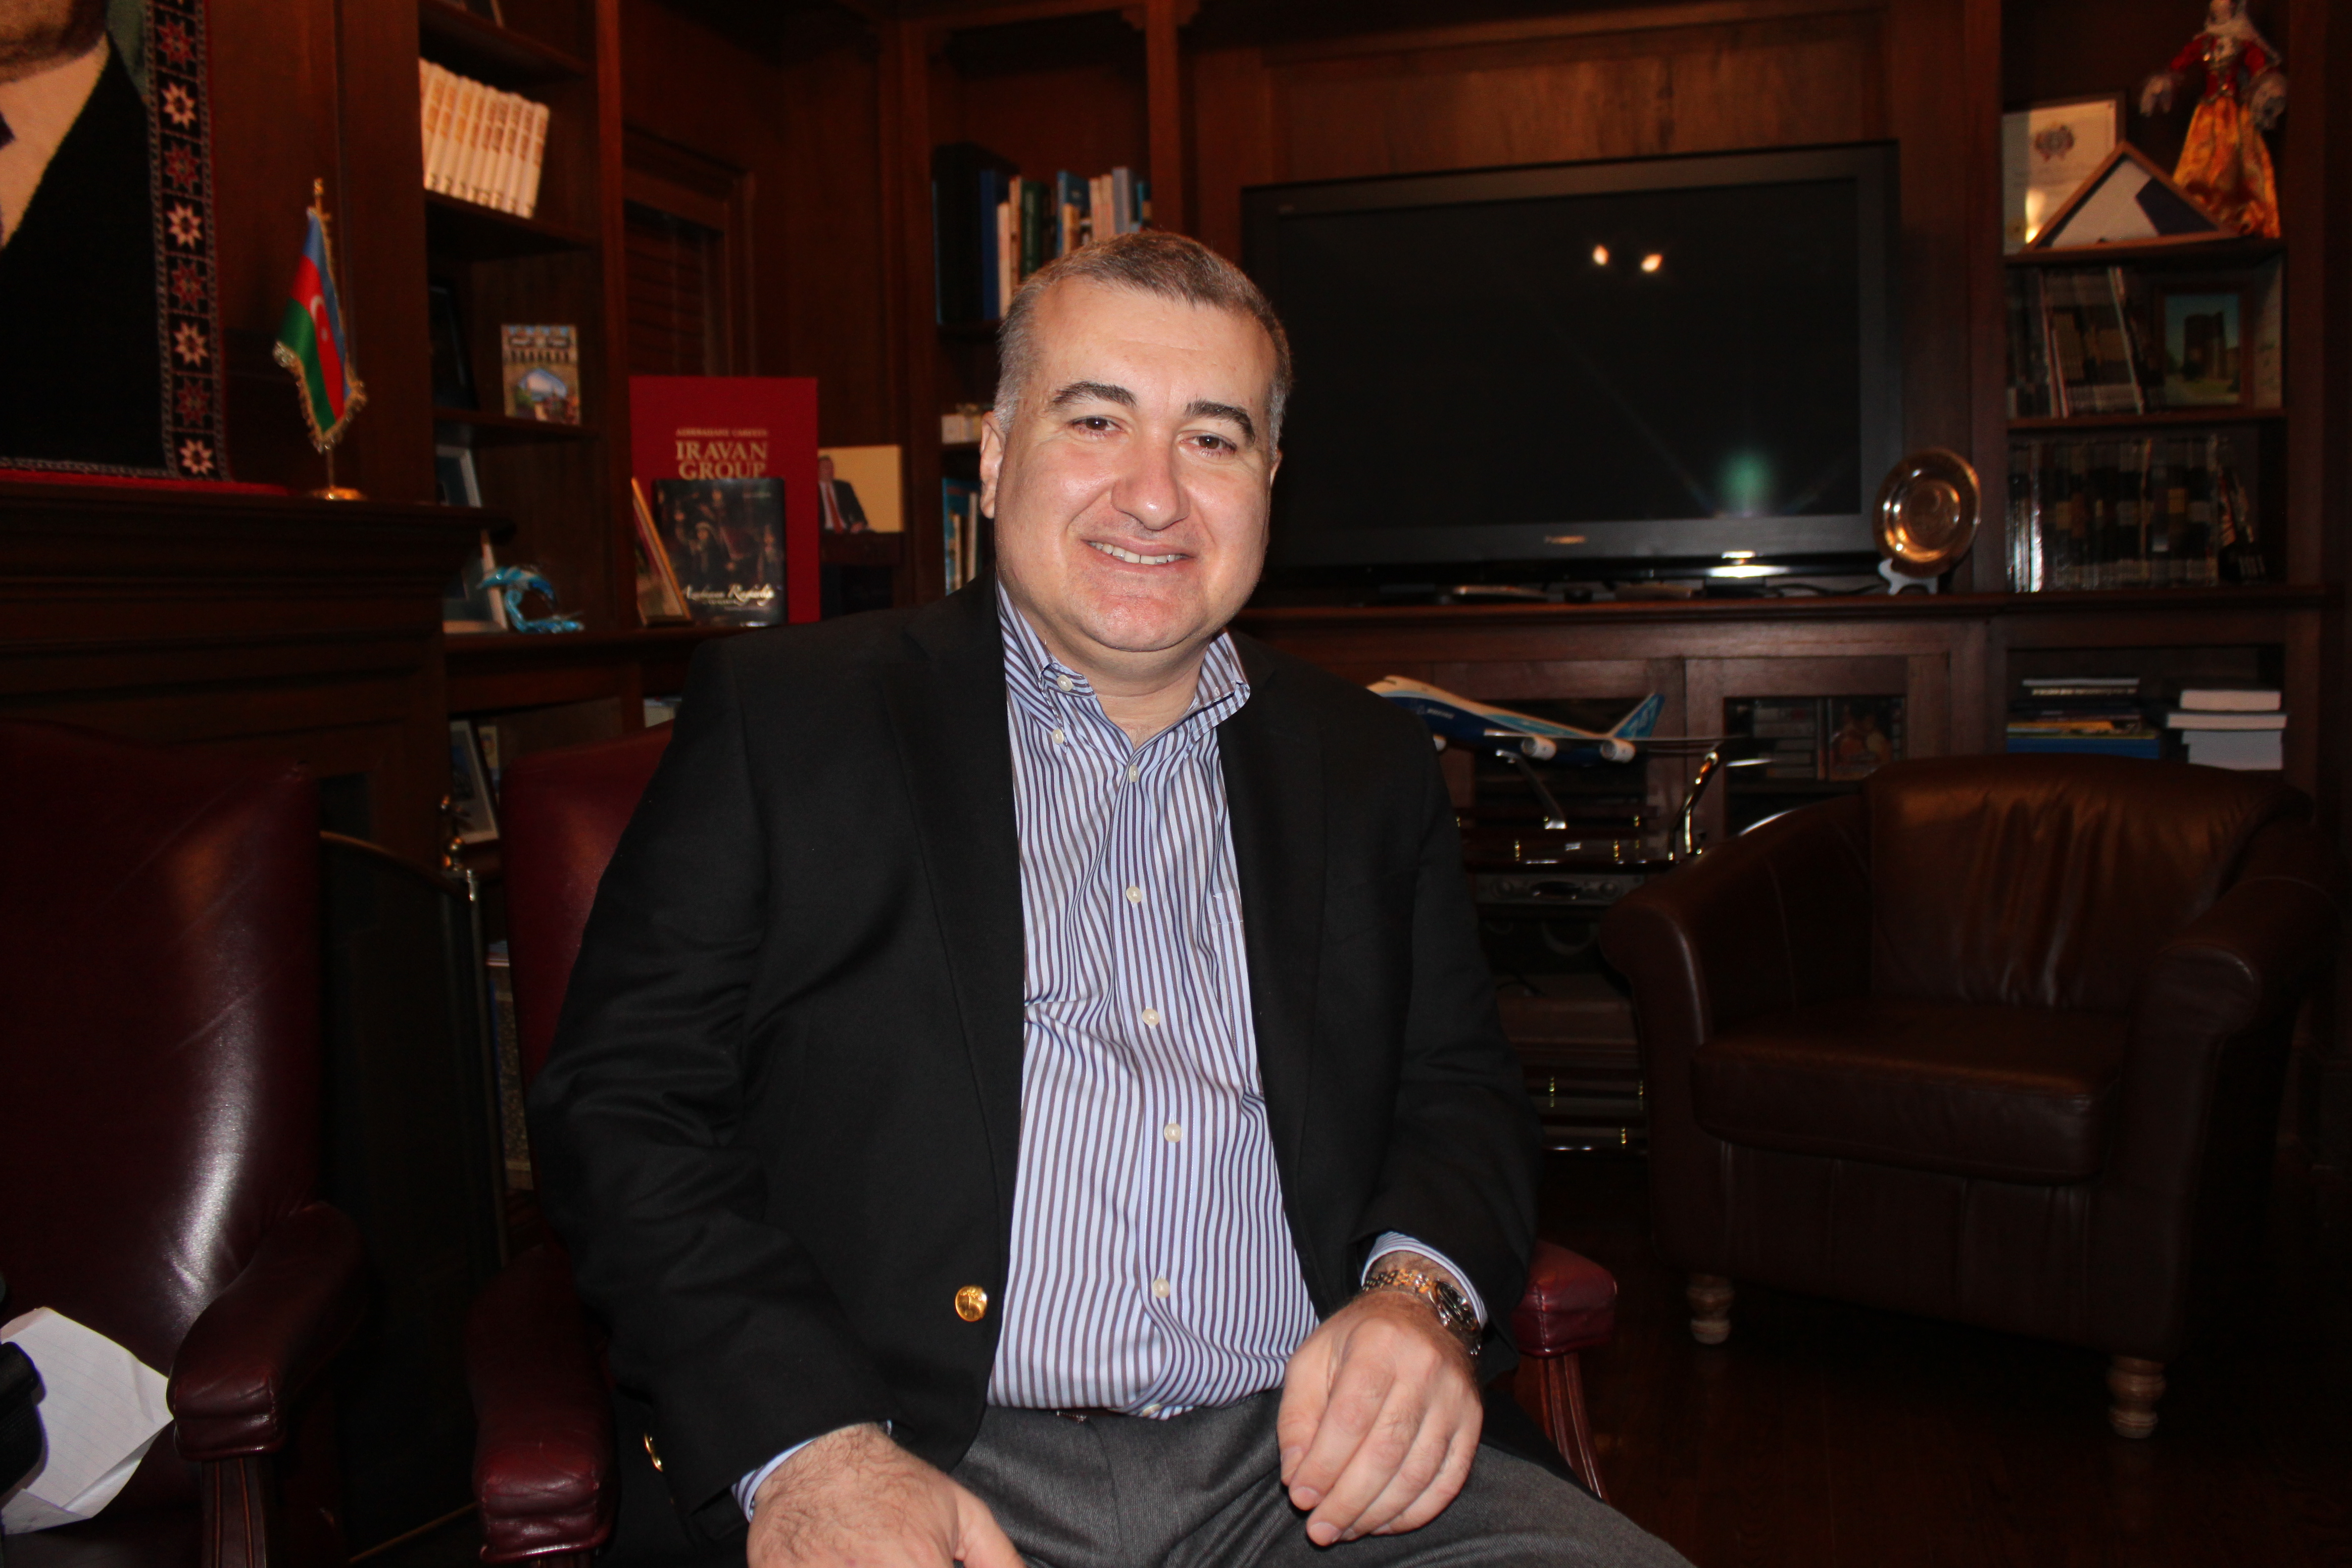 Elin Suleymanov, the Azerbaijani ambassador to the United States, believes that there is no military solution to confront Iran over its nuclear program. (Photo: Josh Siegel/The Daily Signal)